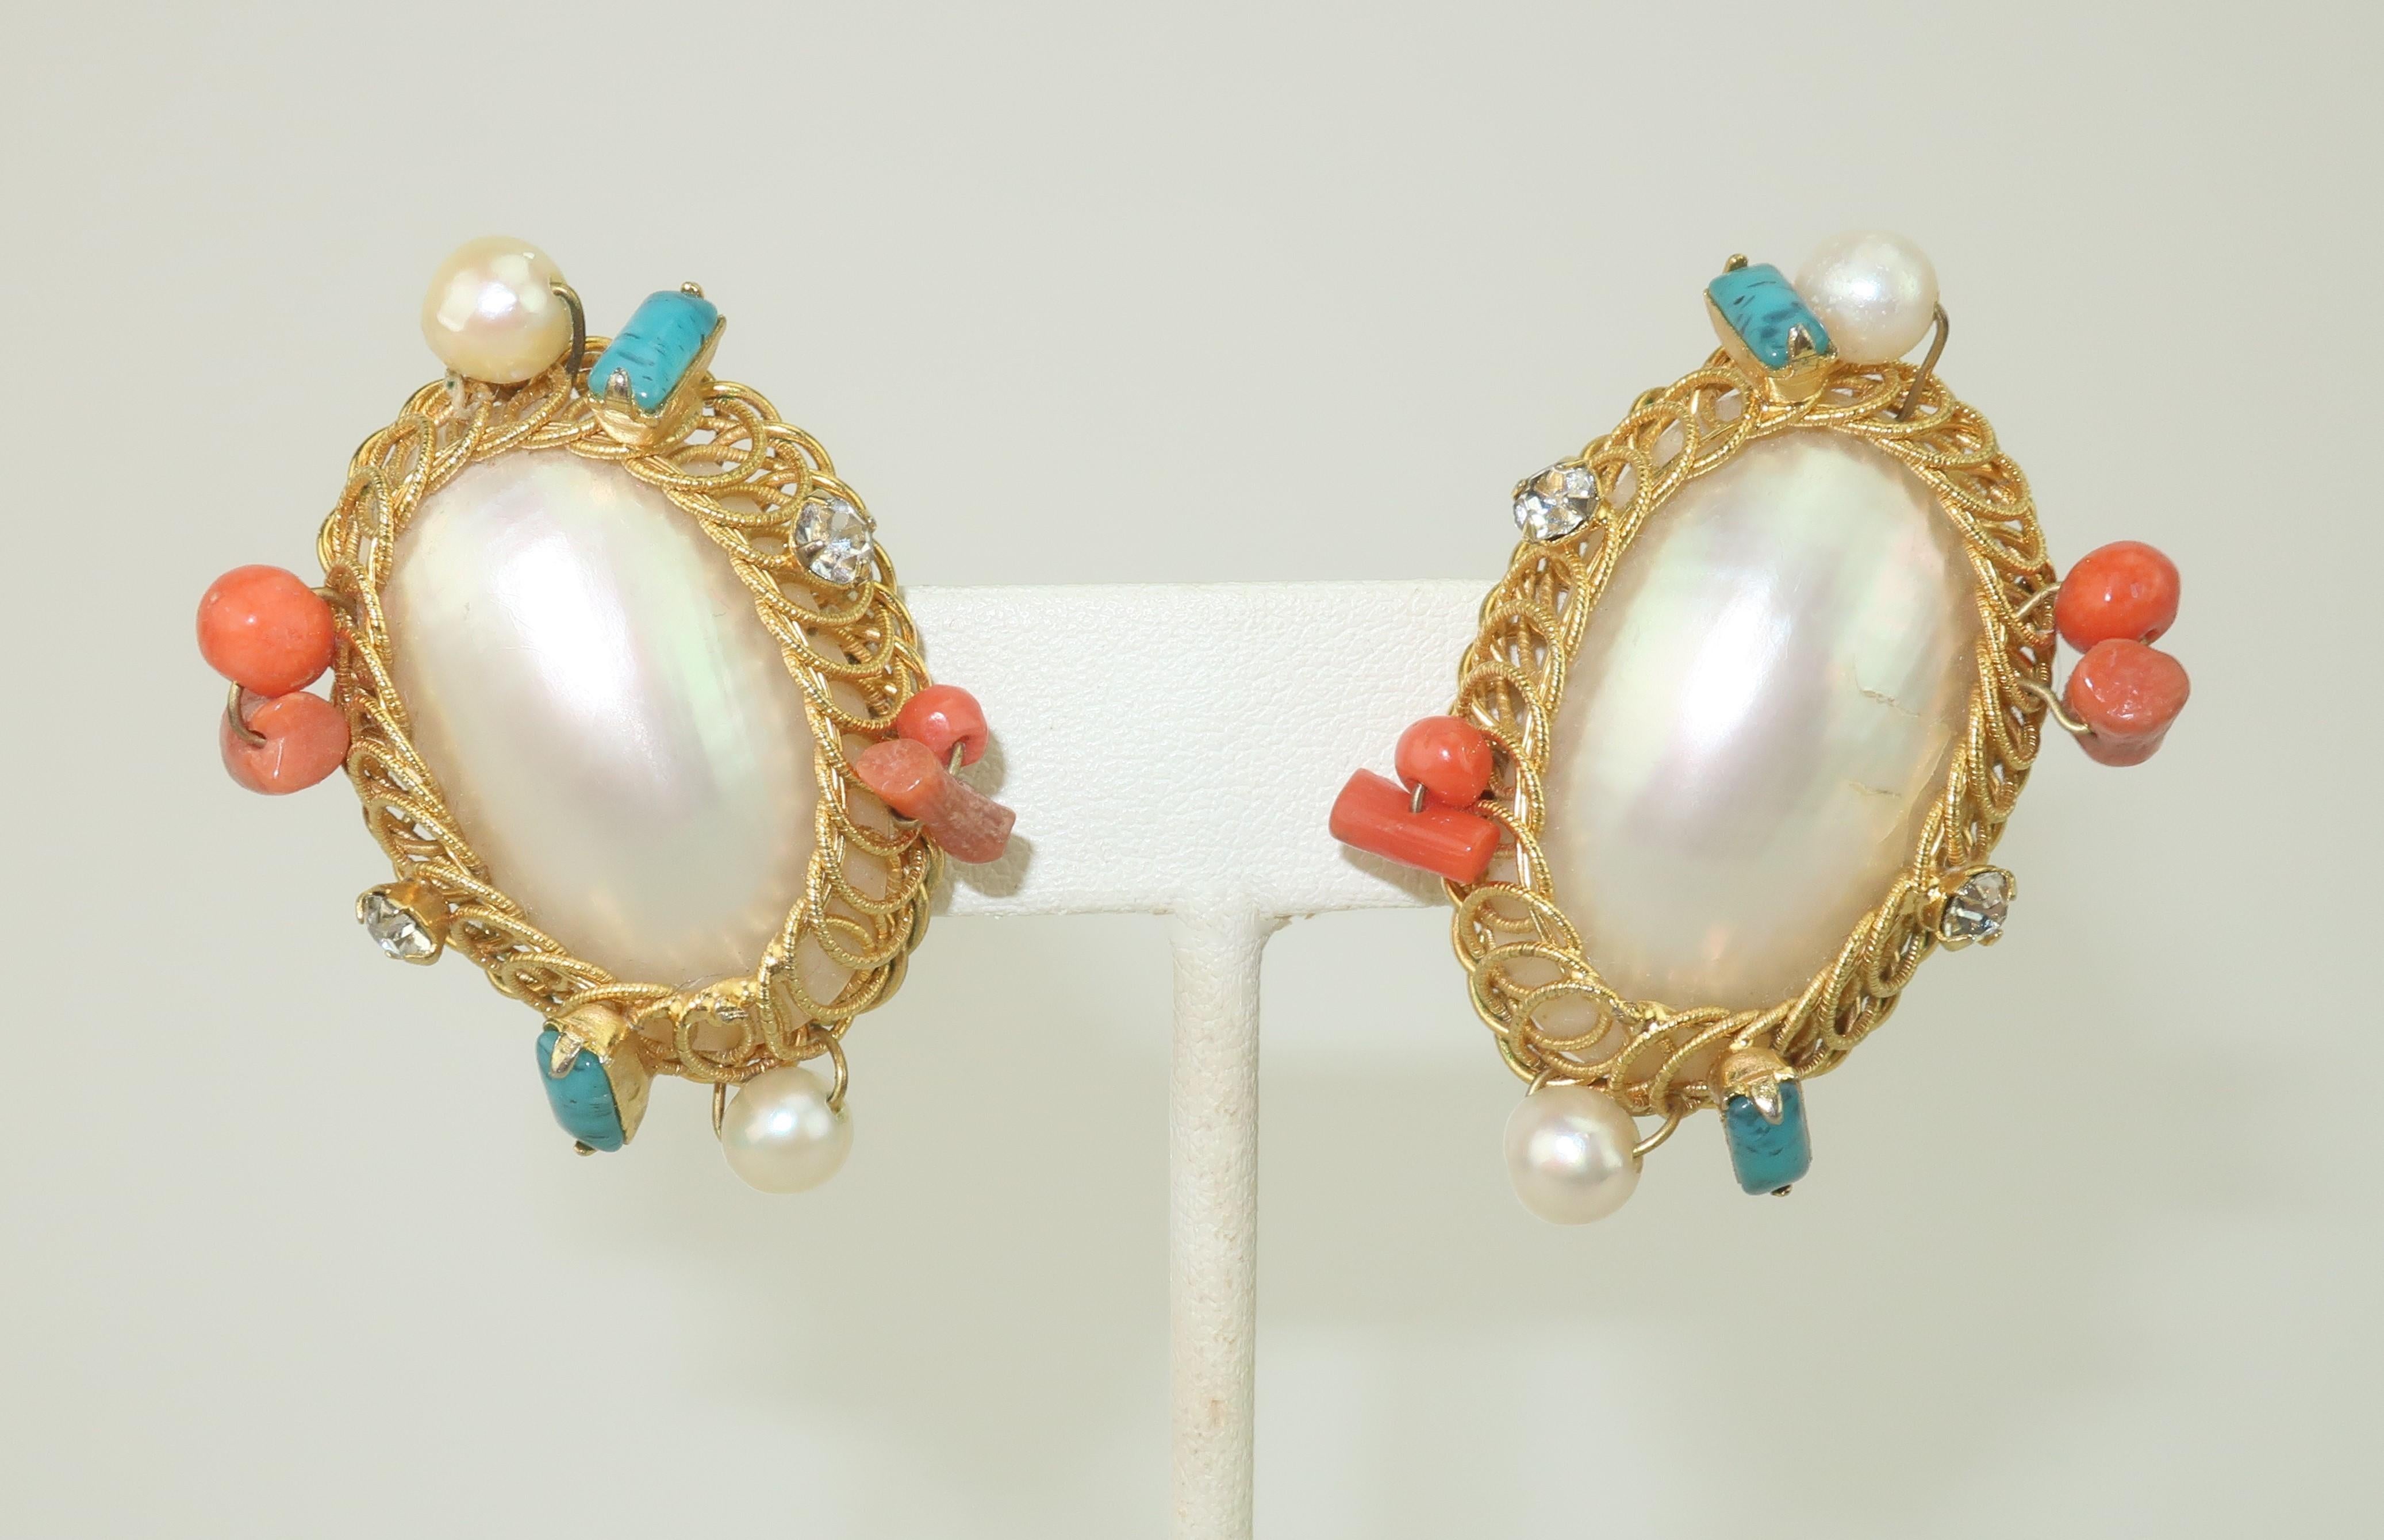 Vintage Hattie Carnegie set consisting of clip-on earrings and a pendant clip in mother-of-pearl framed by looped gold tone metal accented by faux glass coral and turquoise with rhinestones.  The clip-on earrings are designed to sit on an angle. 